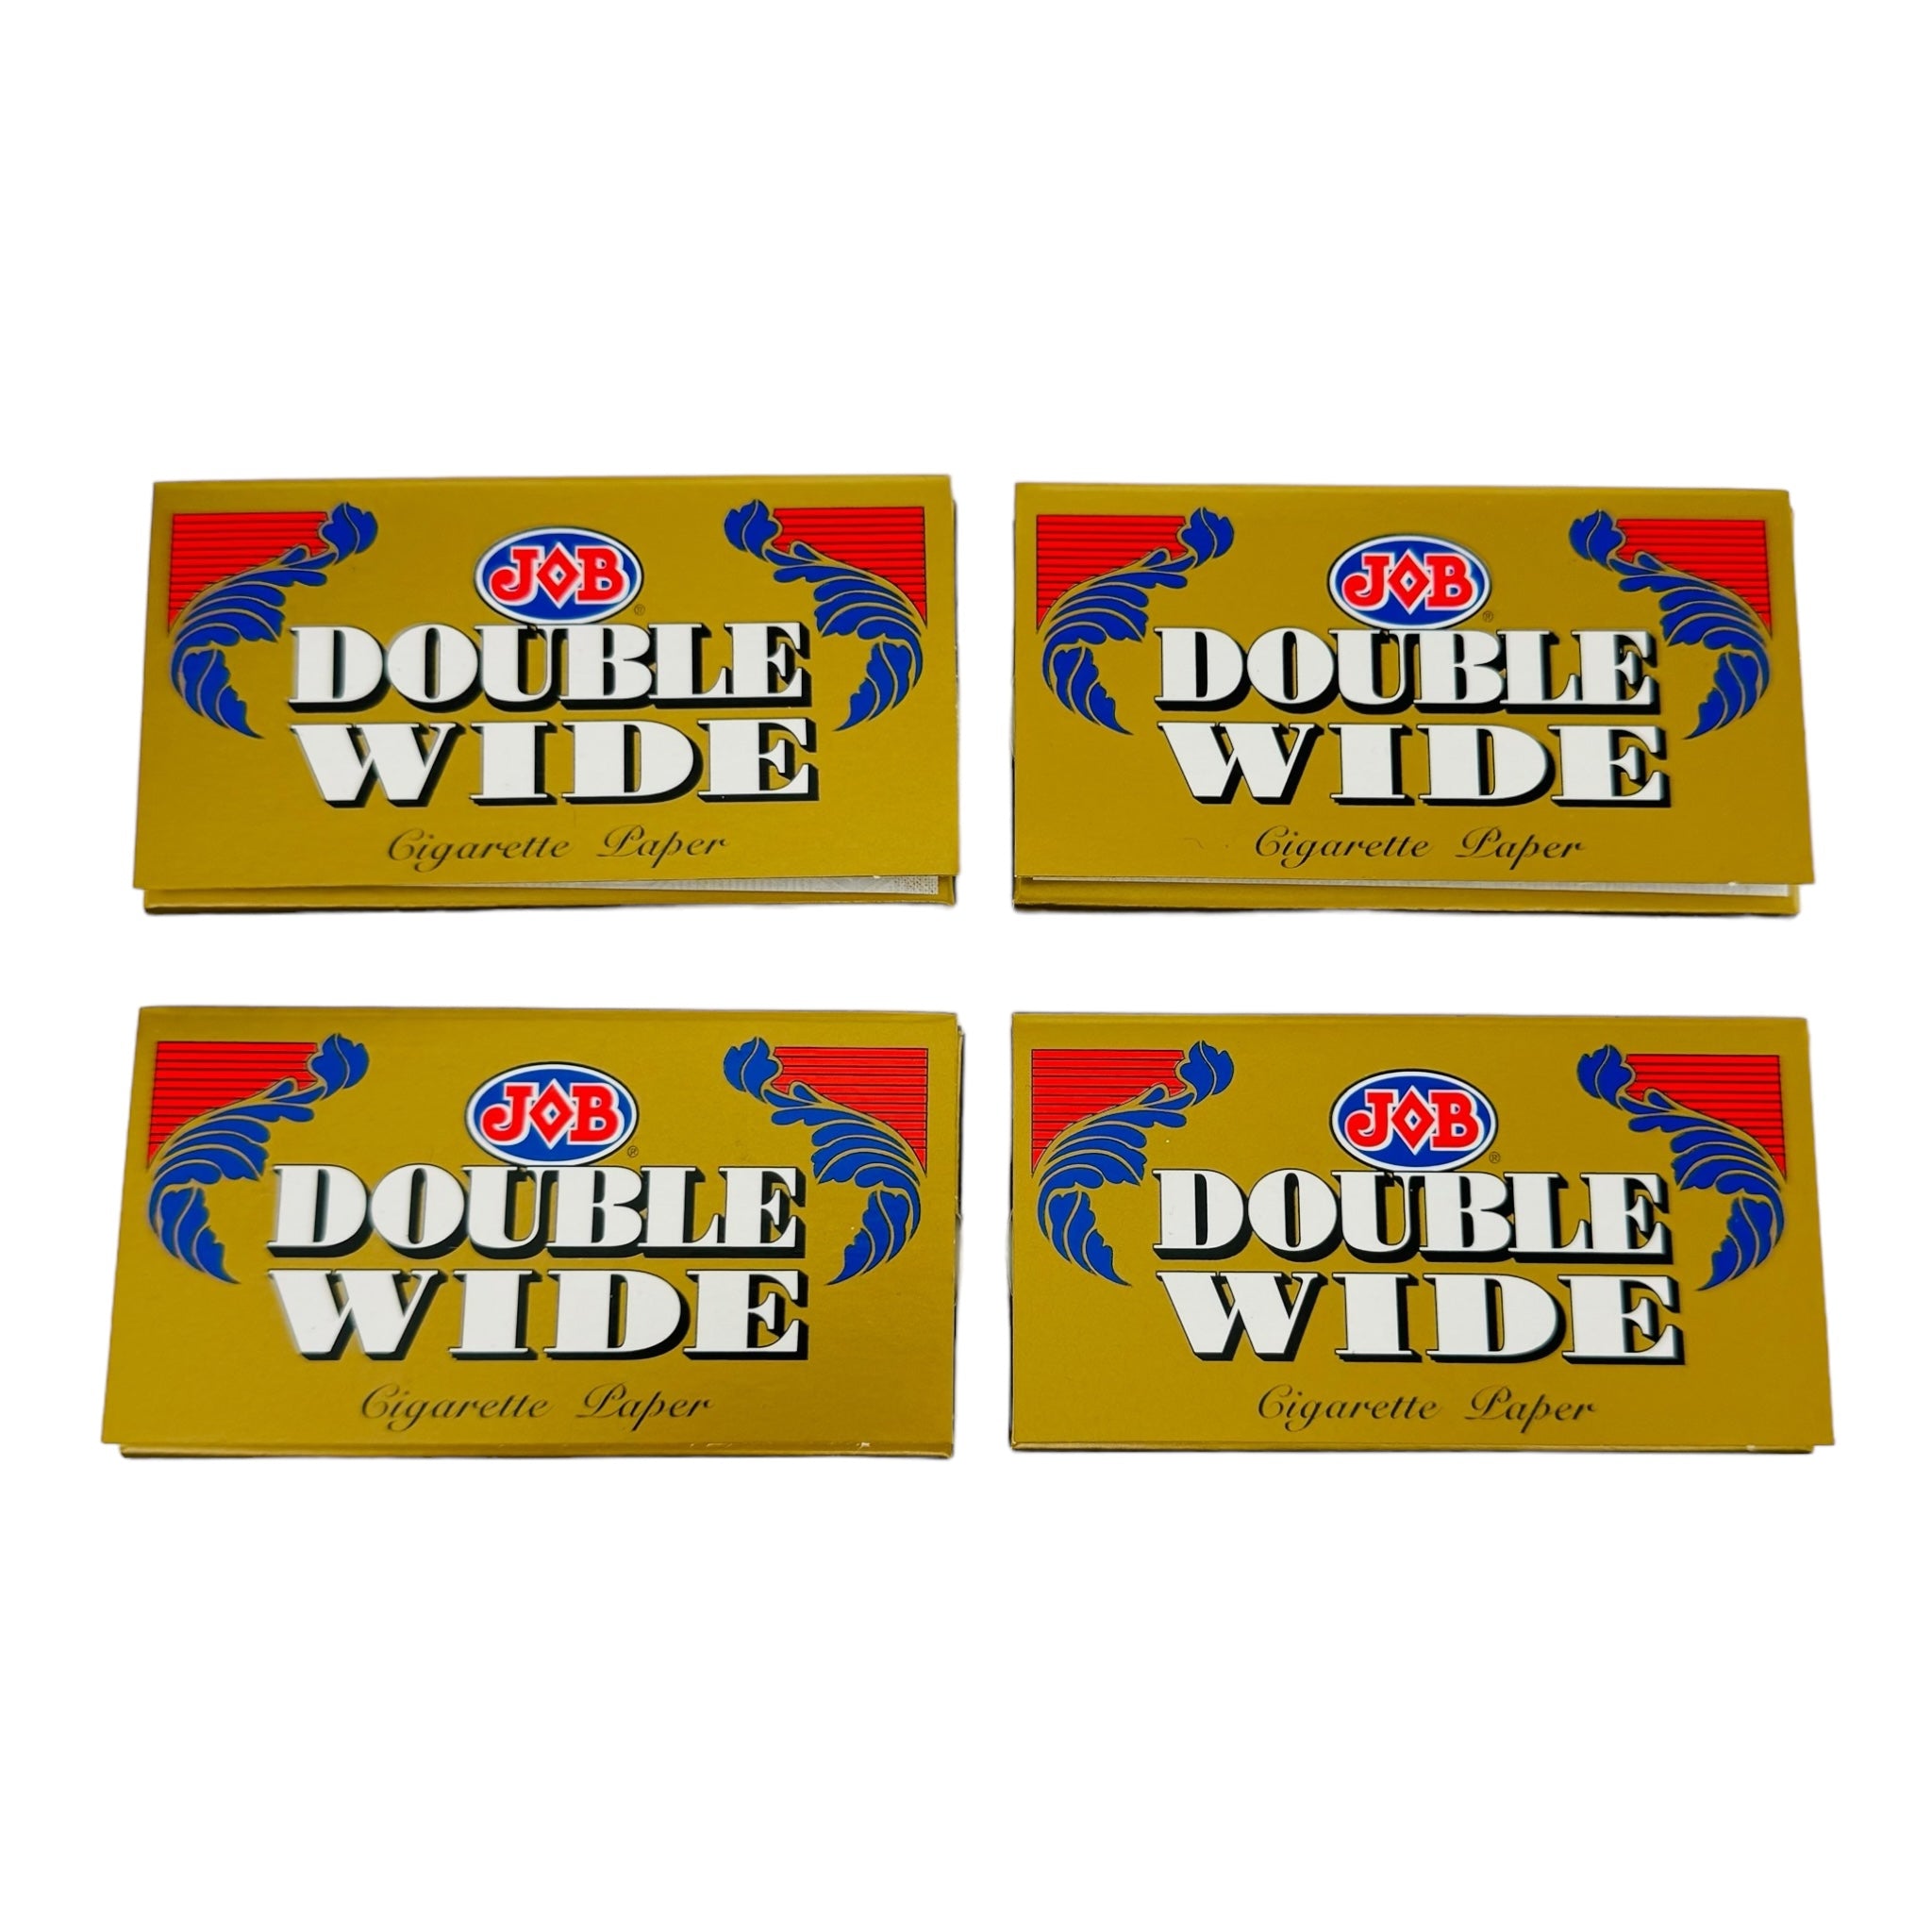 JoB Double Wide Rolling Papers for sale